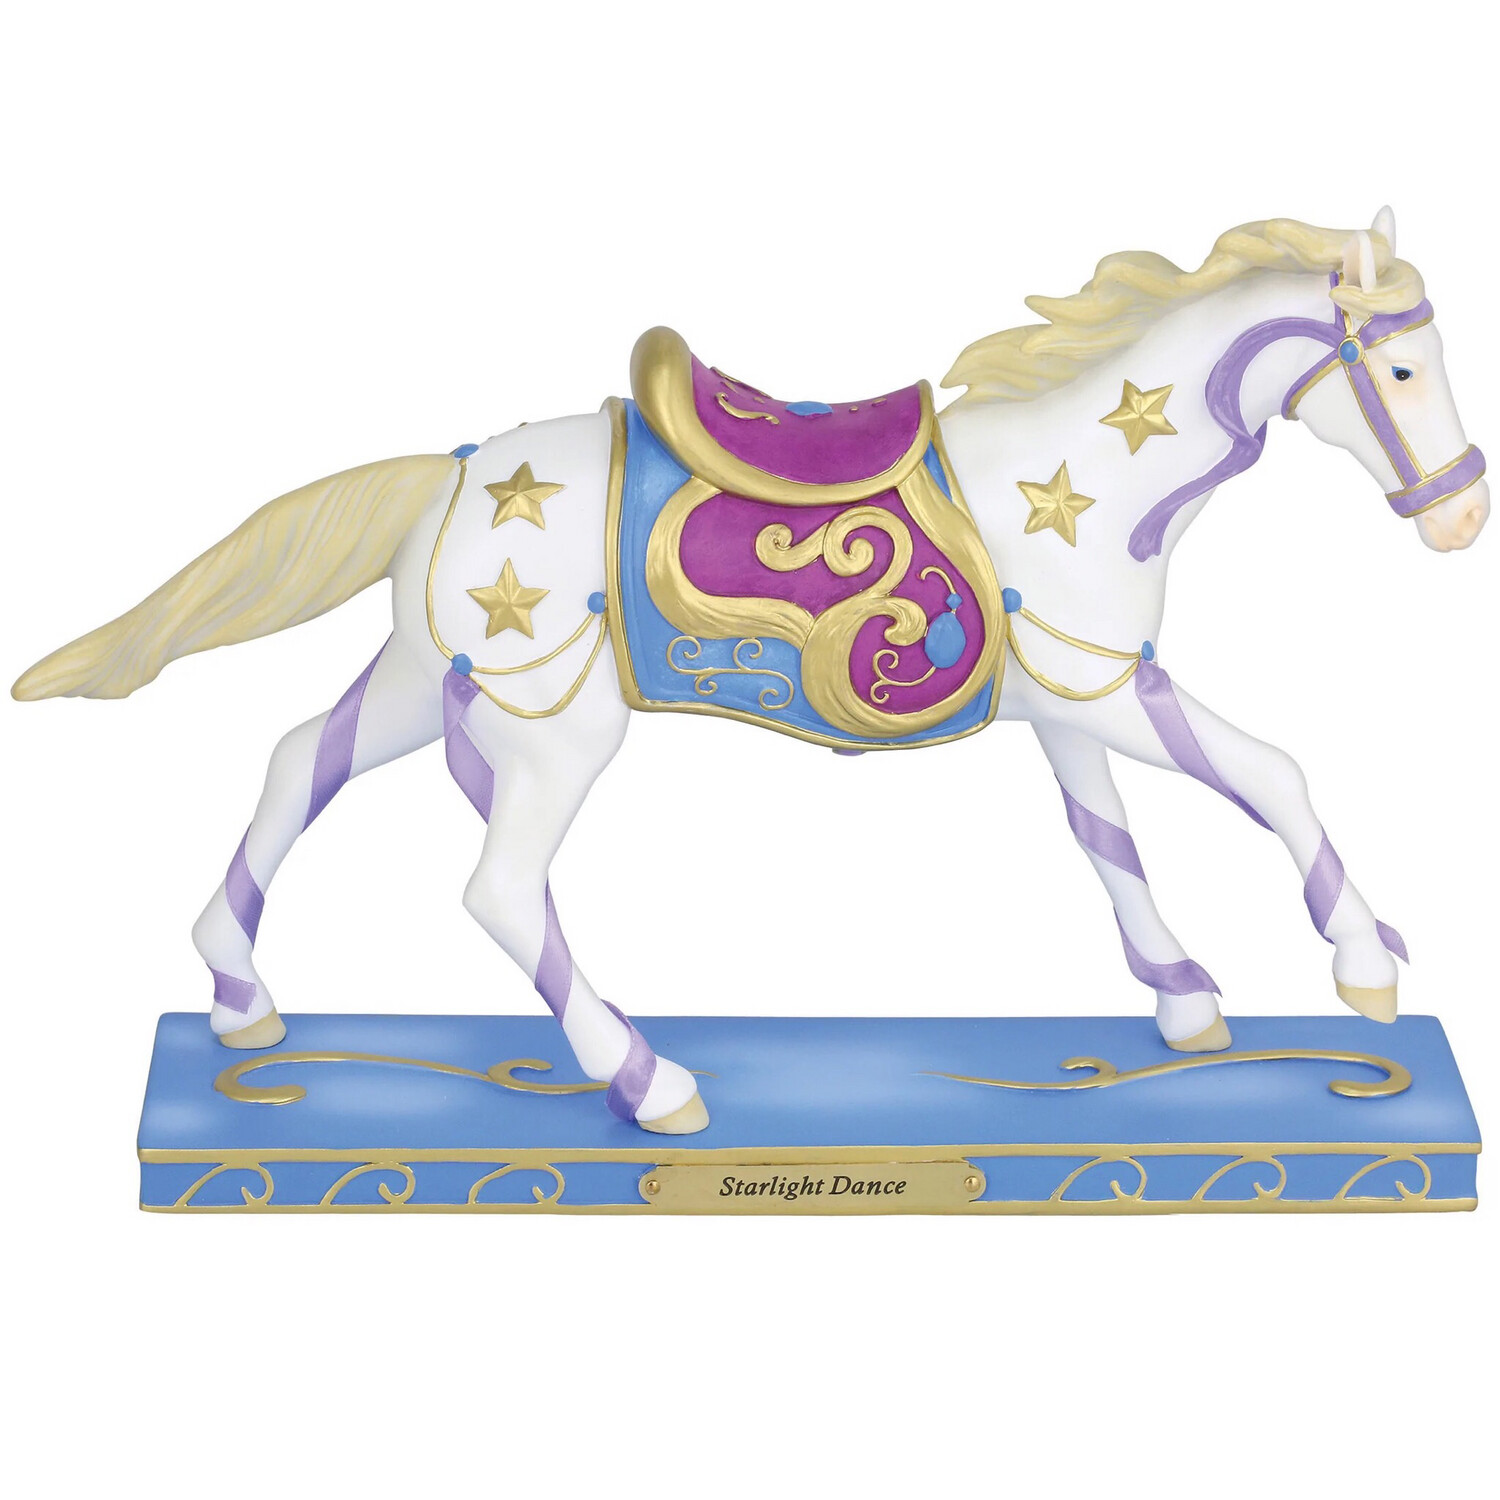 The Trail Of Painted Ponies “Starlight Dance” Horse Figurine (6010723)